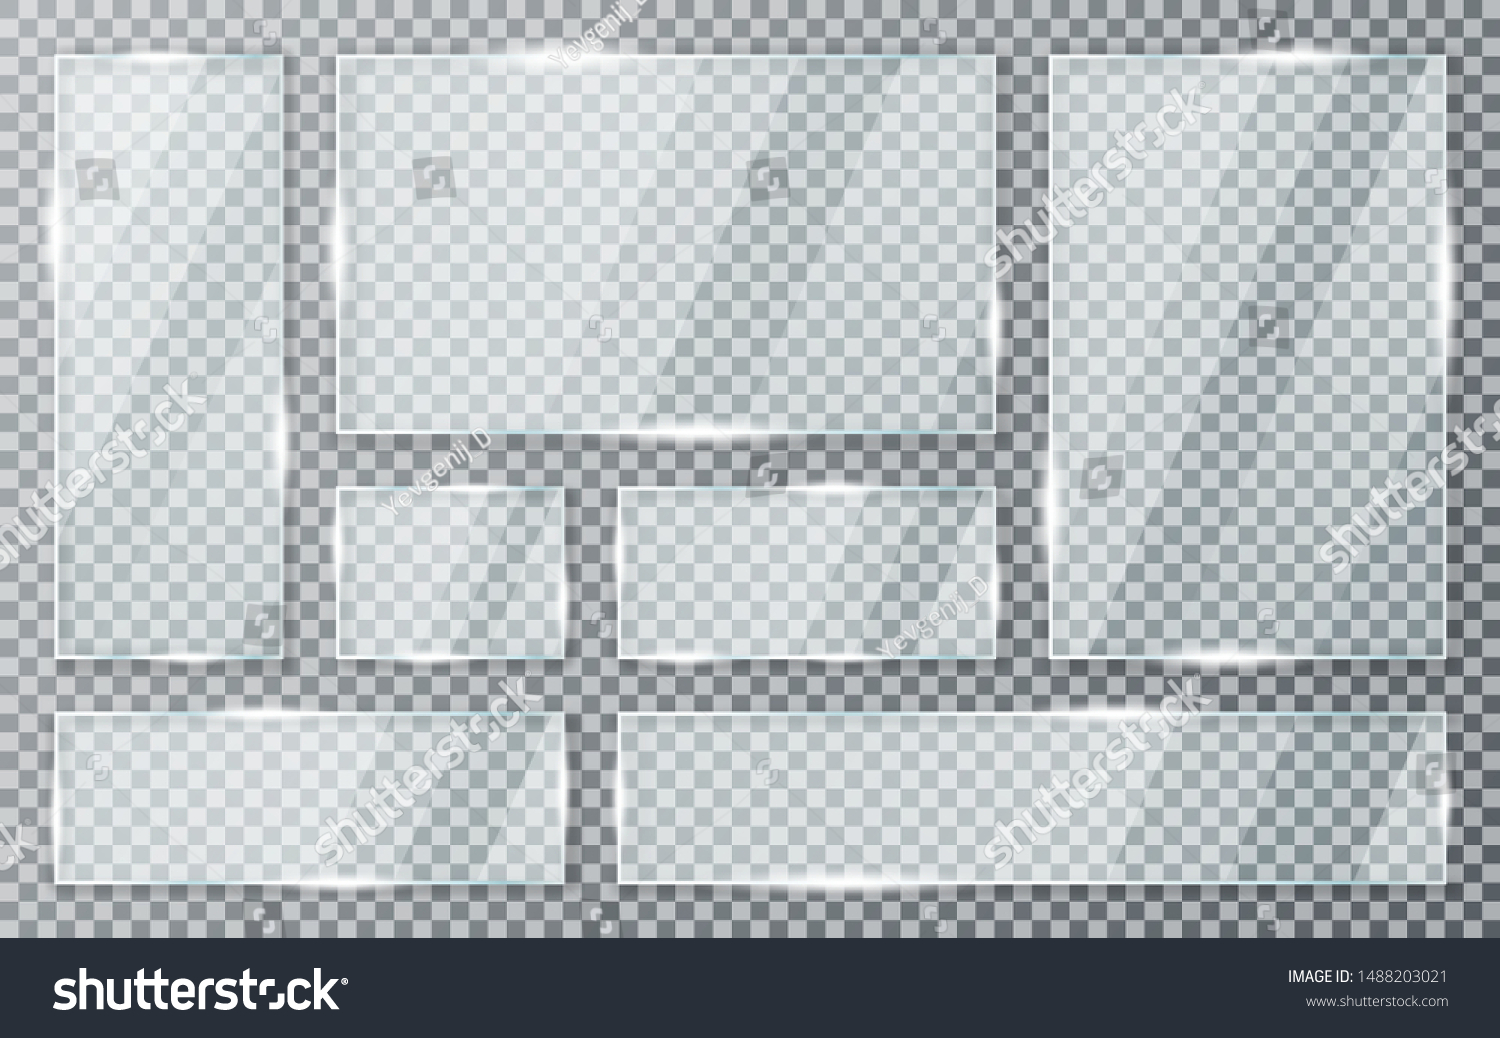 Glass plates set on transparent background. Acrylic and glass texture with glares and light. Realistic transparent glass window in rectangle frame. Vector #1488203021